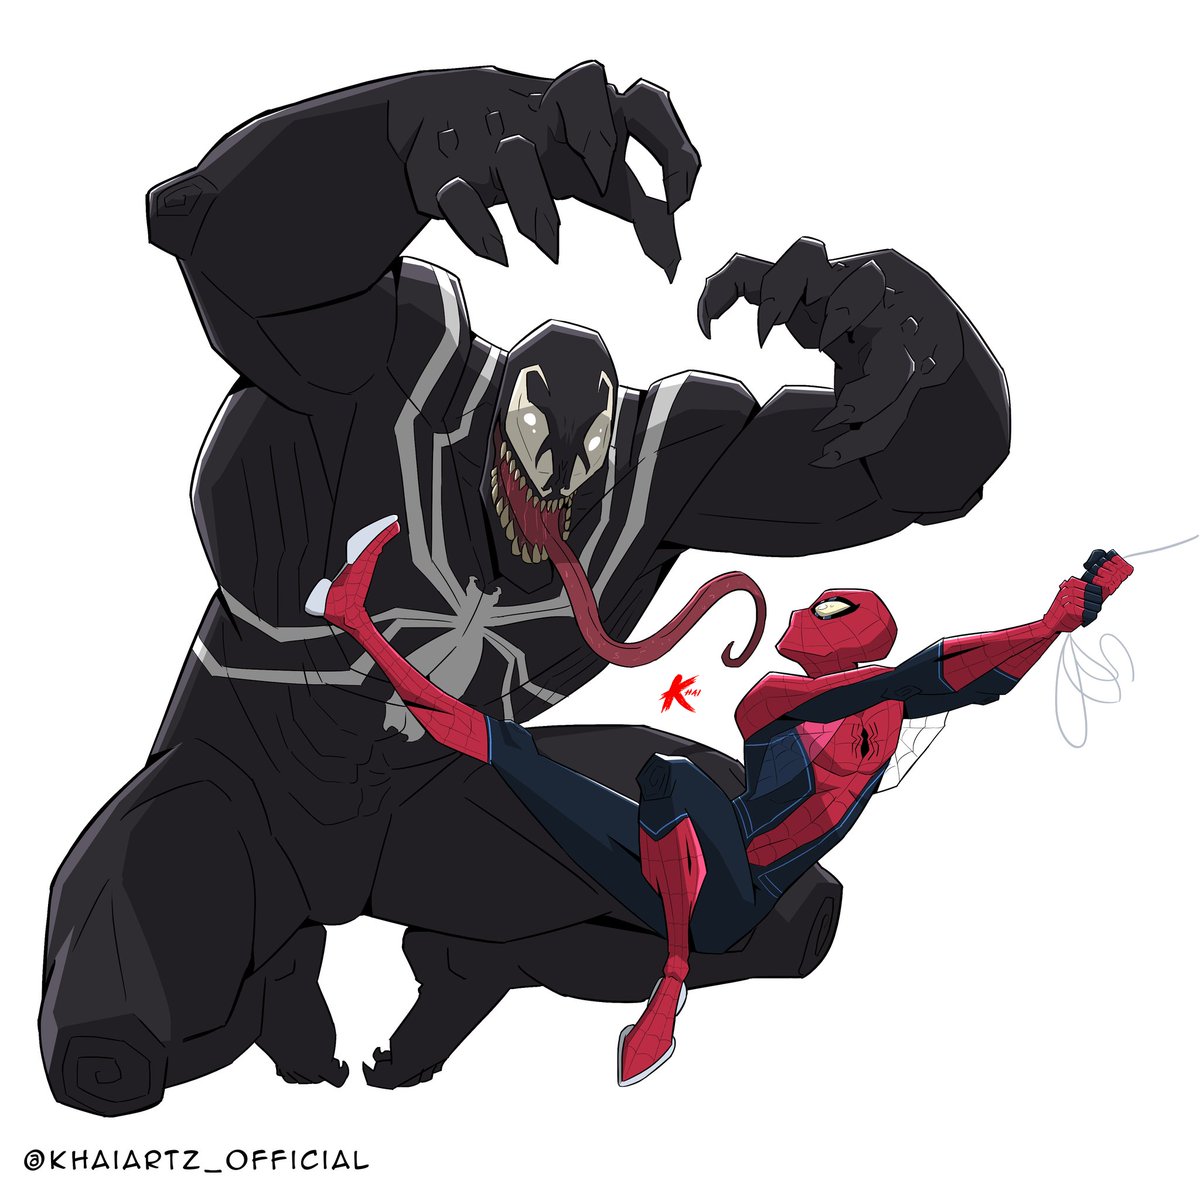 Took part in the draw in this in your style challenge by @MasterAnatomy . Did their Spider-Man vs Venom one, Spider-Man' suit is my own redesign and Venom's look is my take too with the sharp eyes like the animated series. #drawMOA #SpiderMan #Venom #Marvel #drawthisinyourstyle https://t.co/RE0XOVBS2m